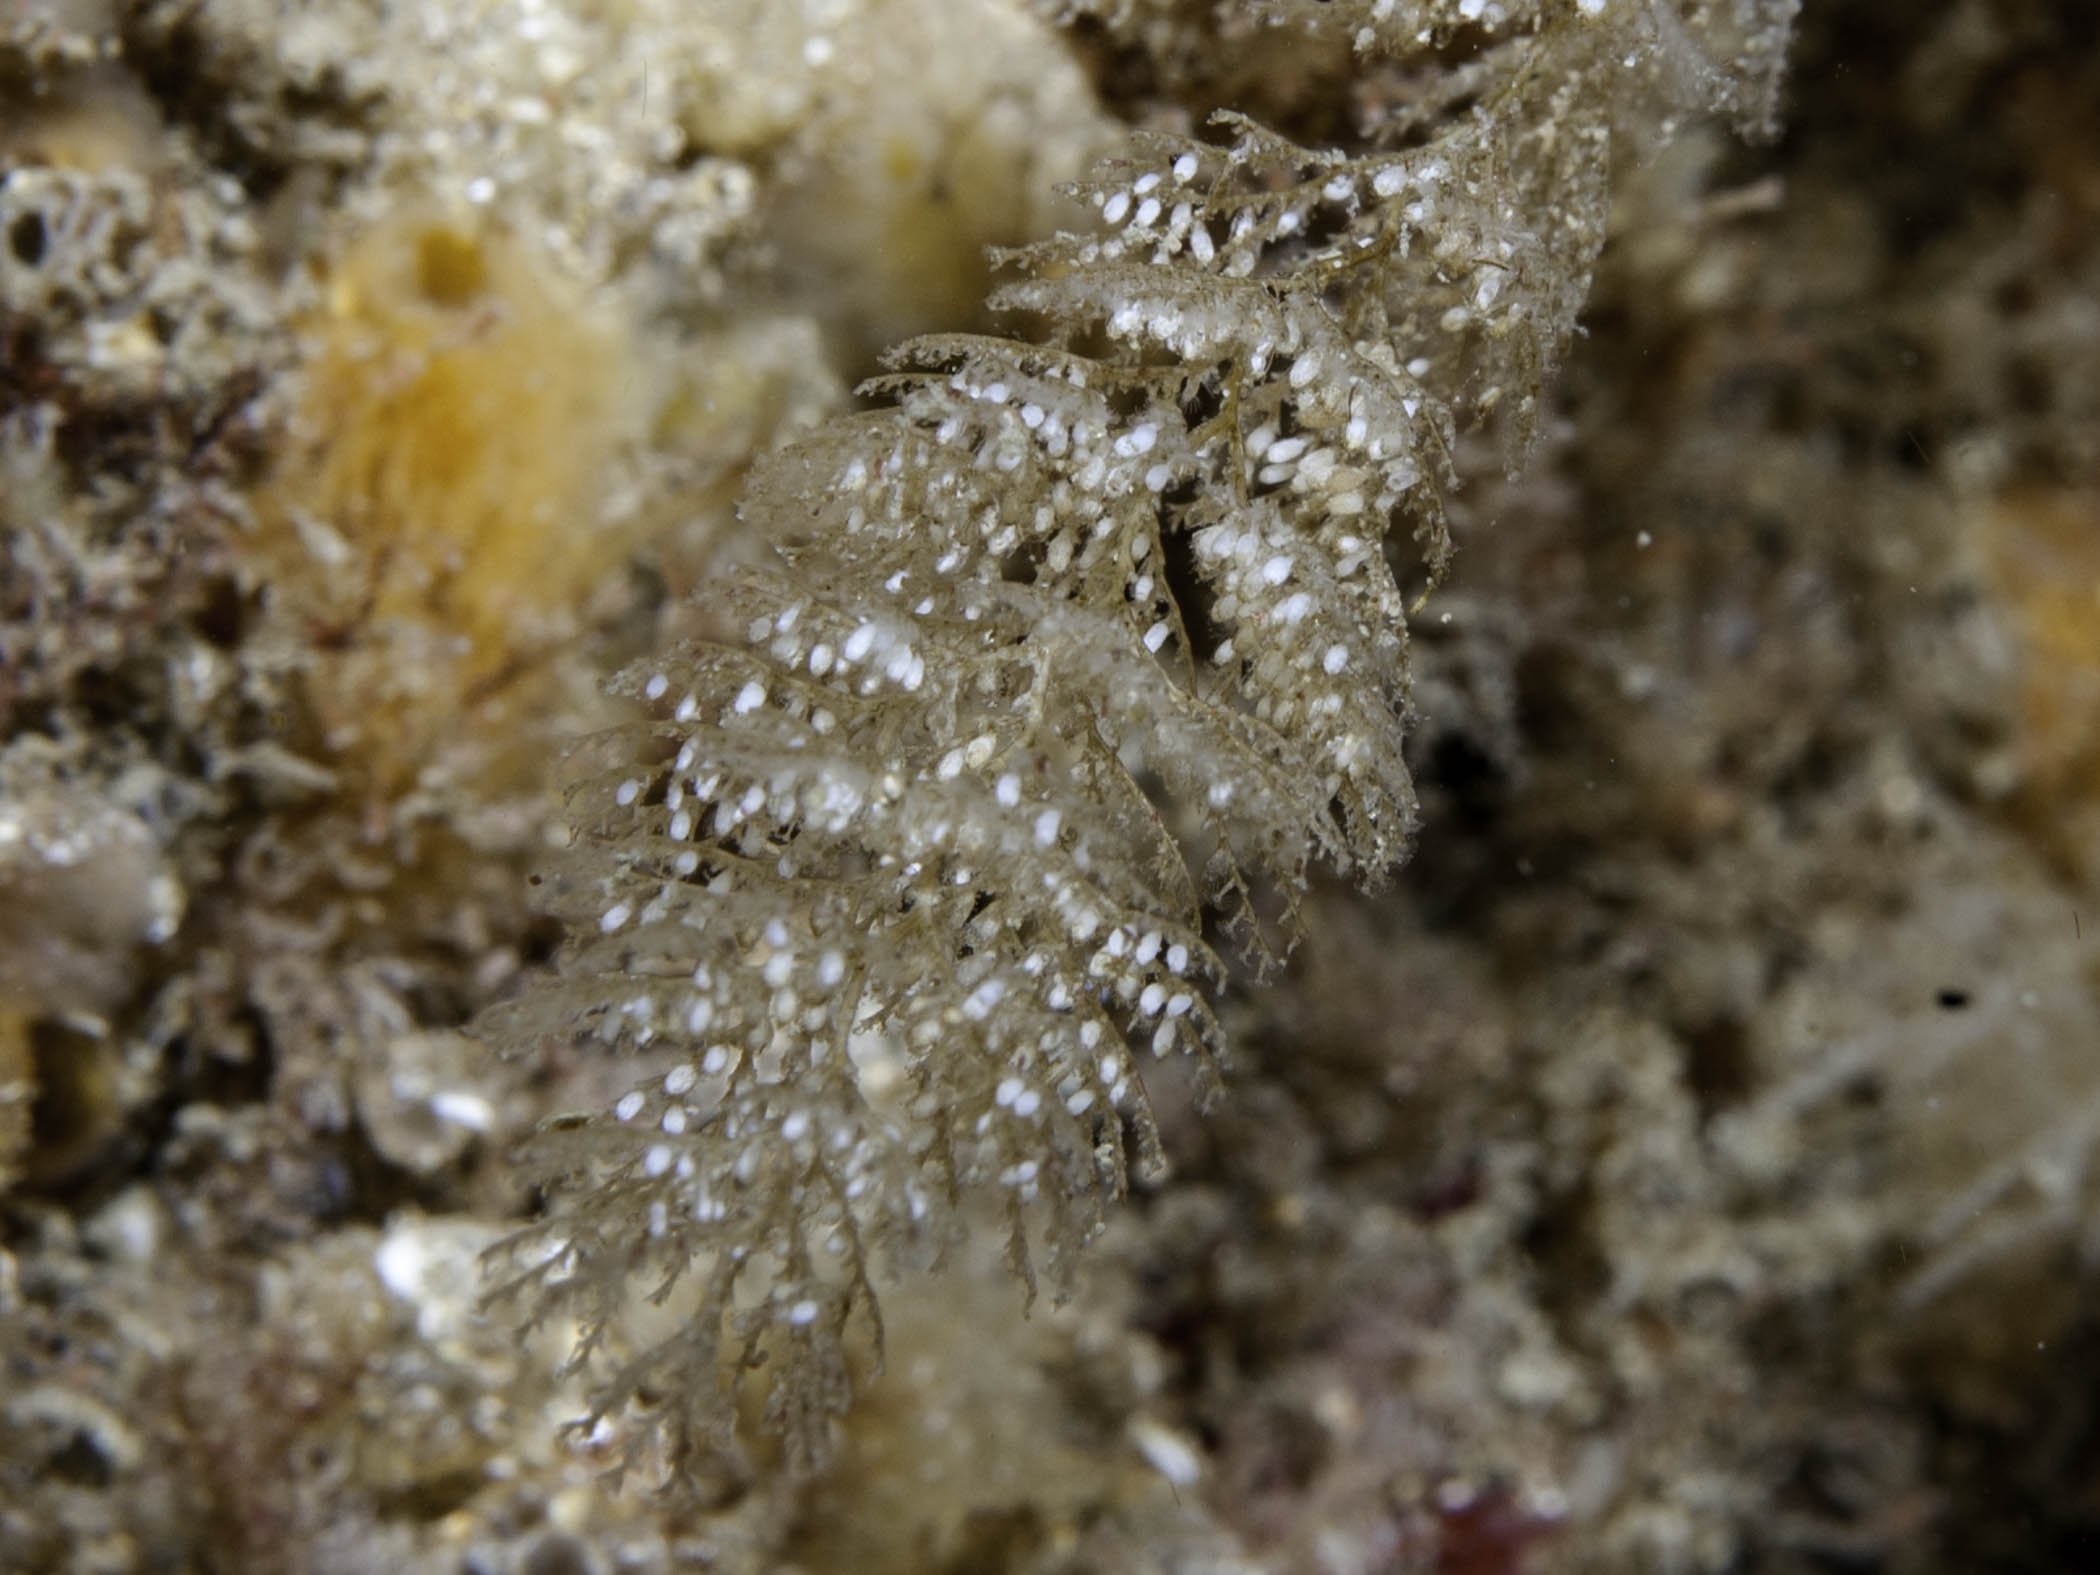 image: Sertularia argentea. Close-up of colony showing gonothecae, Torr Head, Northern Ireland, 2006.